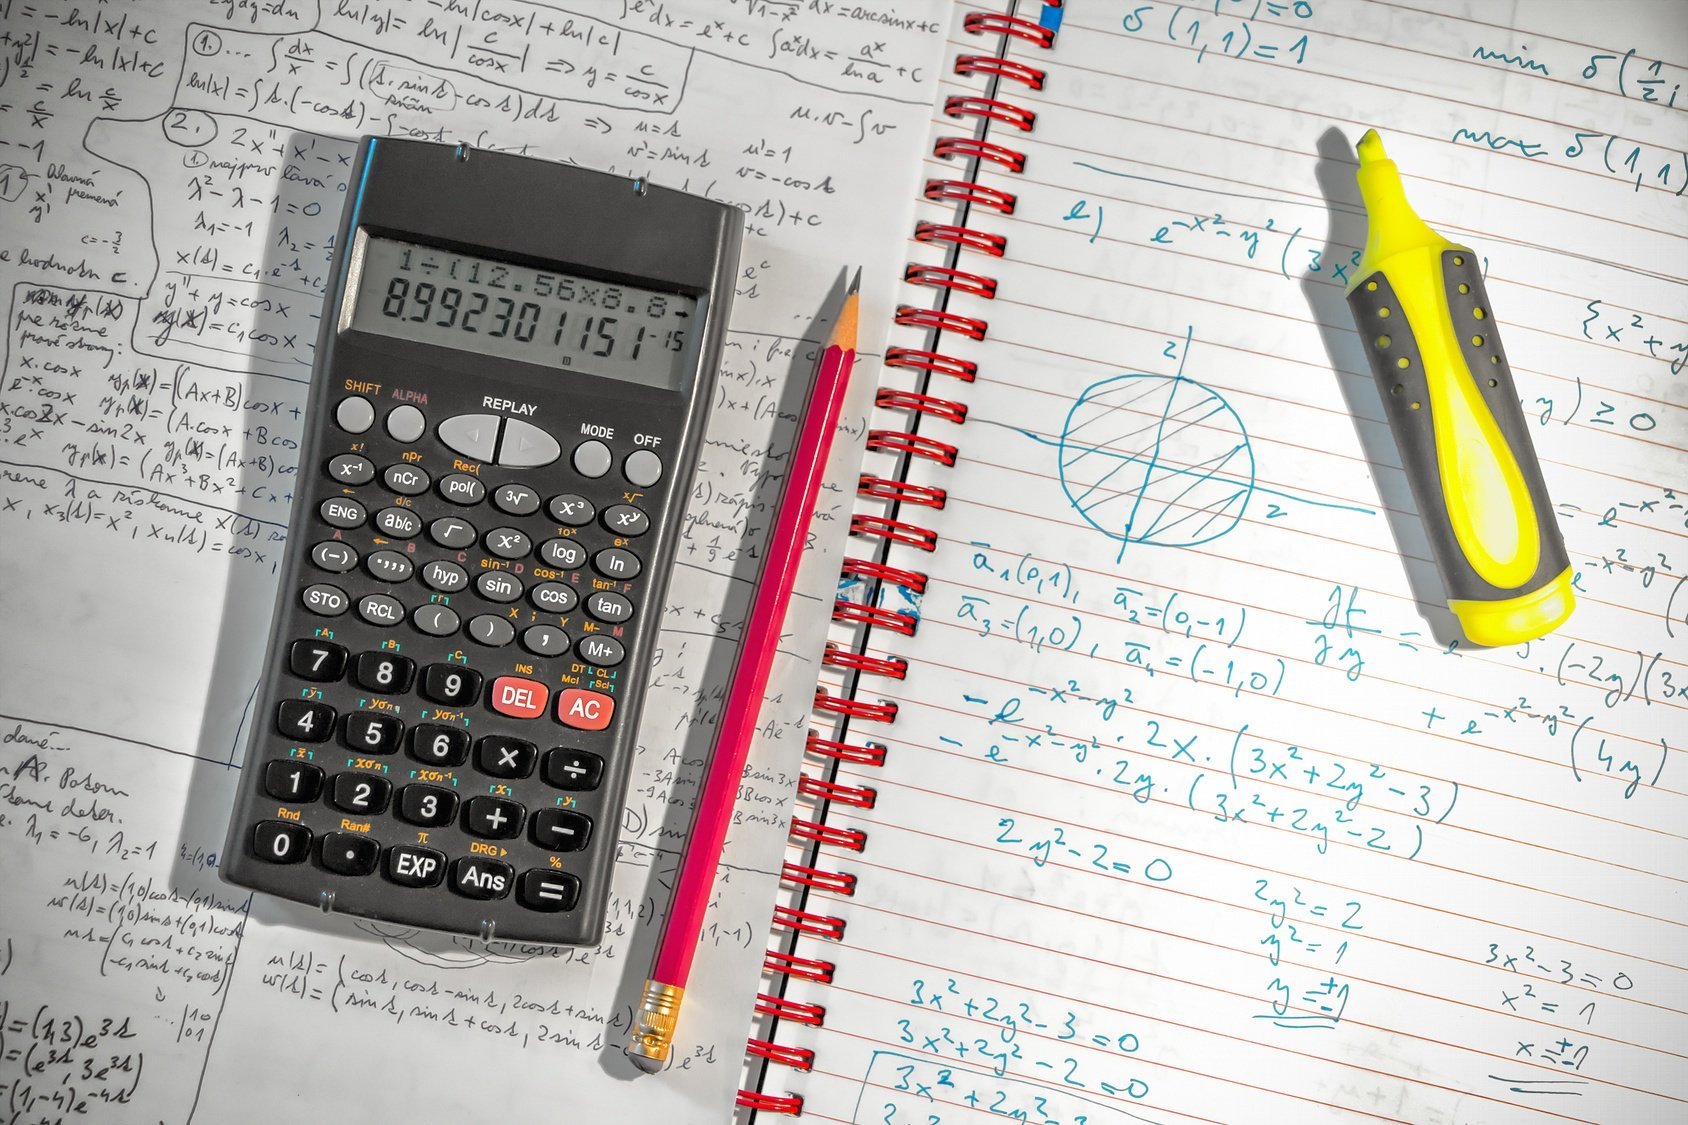 Cracking the Digital SAT Code: The Game-Changing Impact of Online Calculator